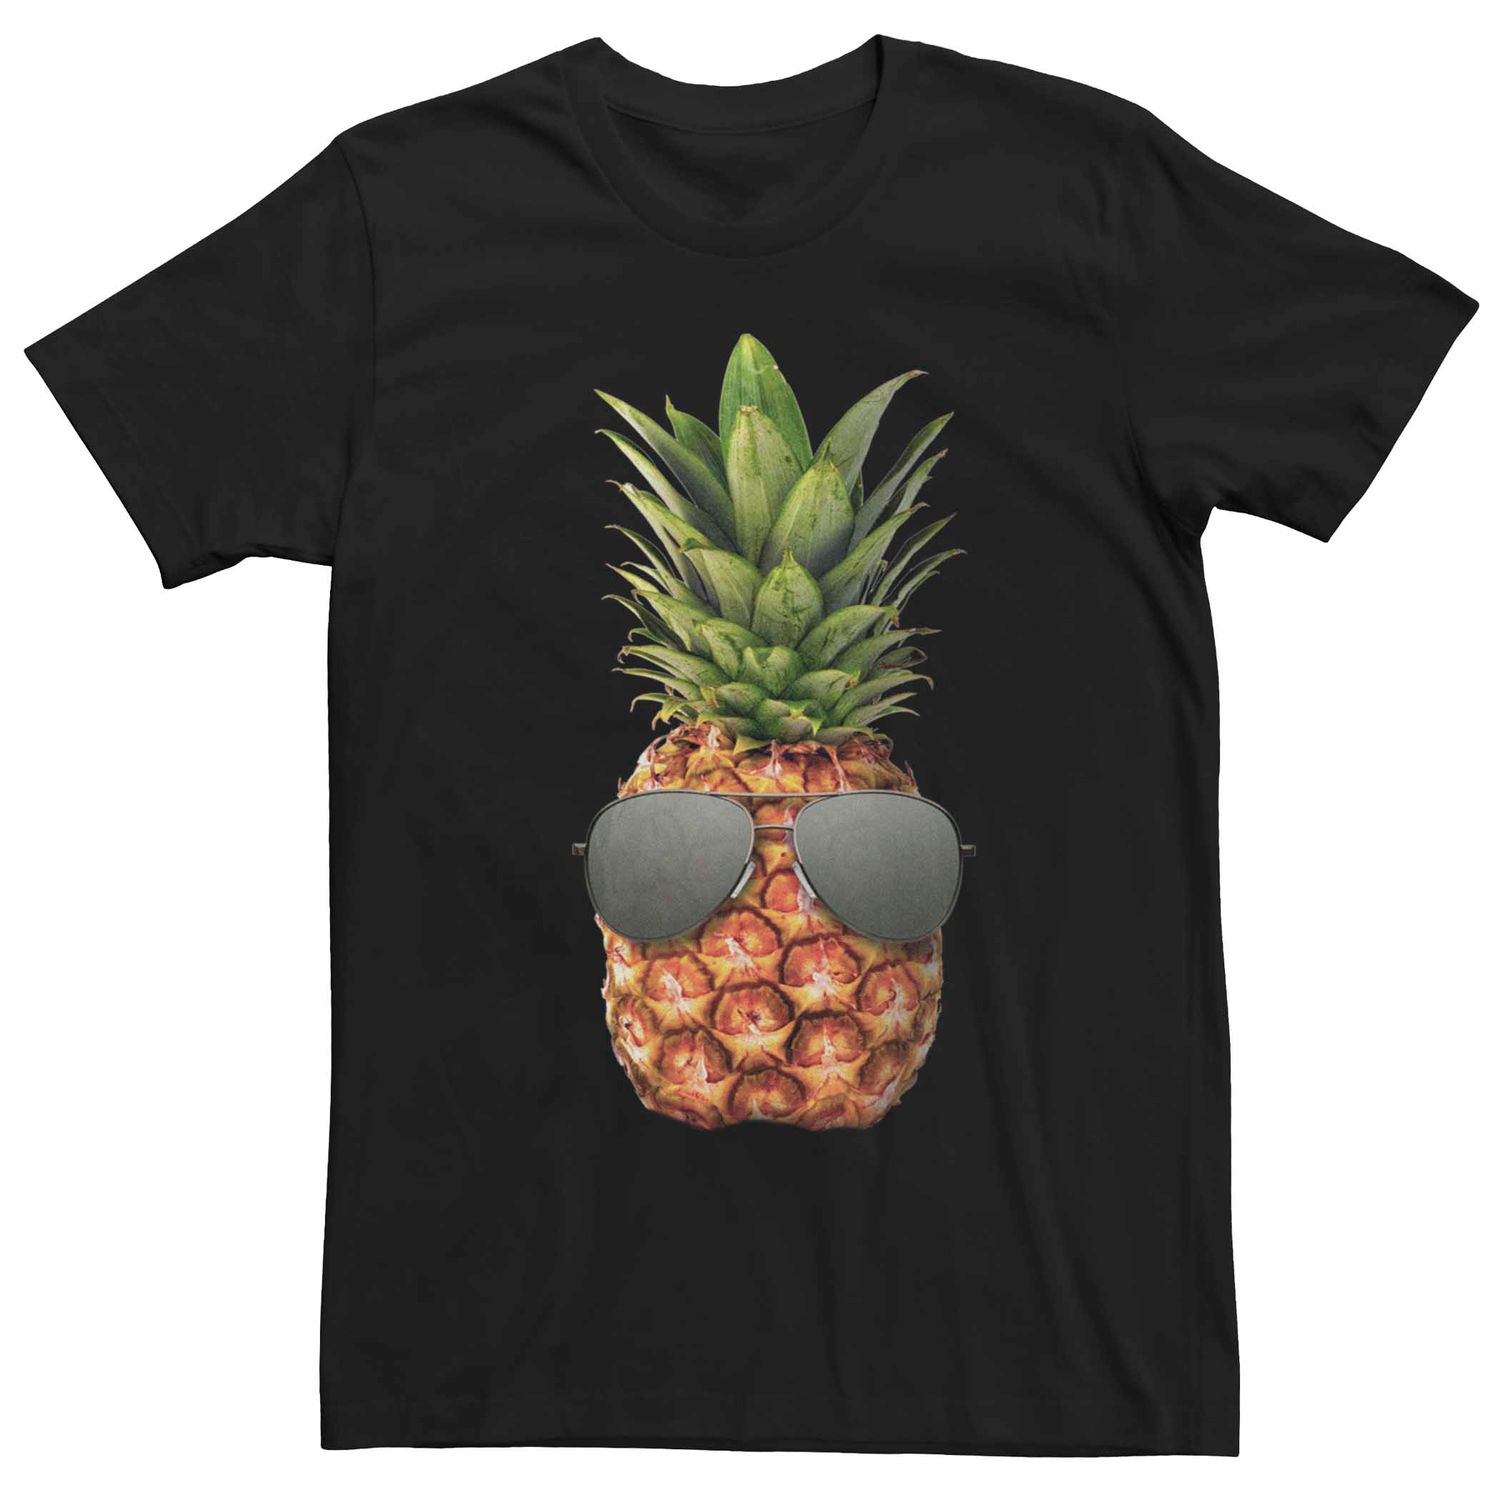 Image for Licensed Character Men's Cool Pineapple Shades Graphic Tee at Kohl's.